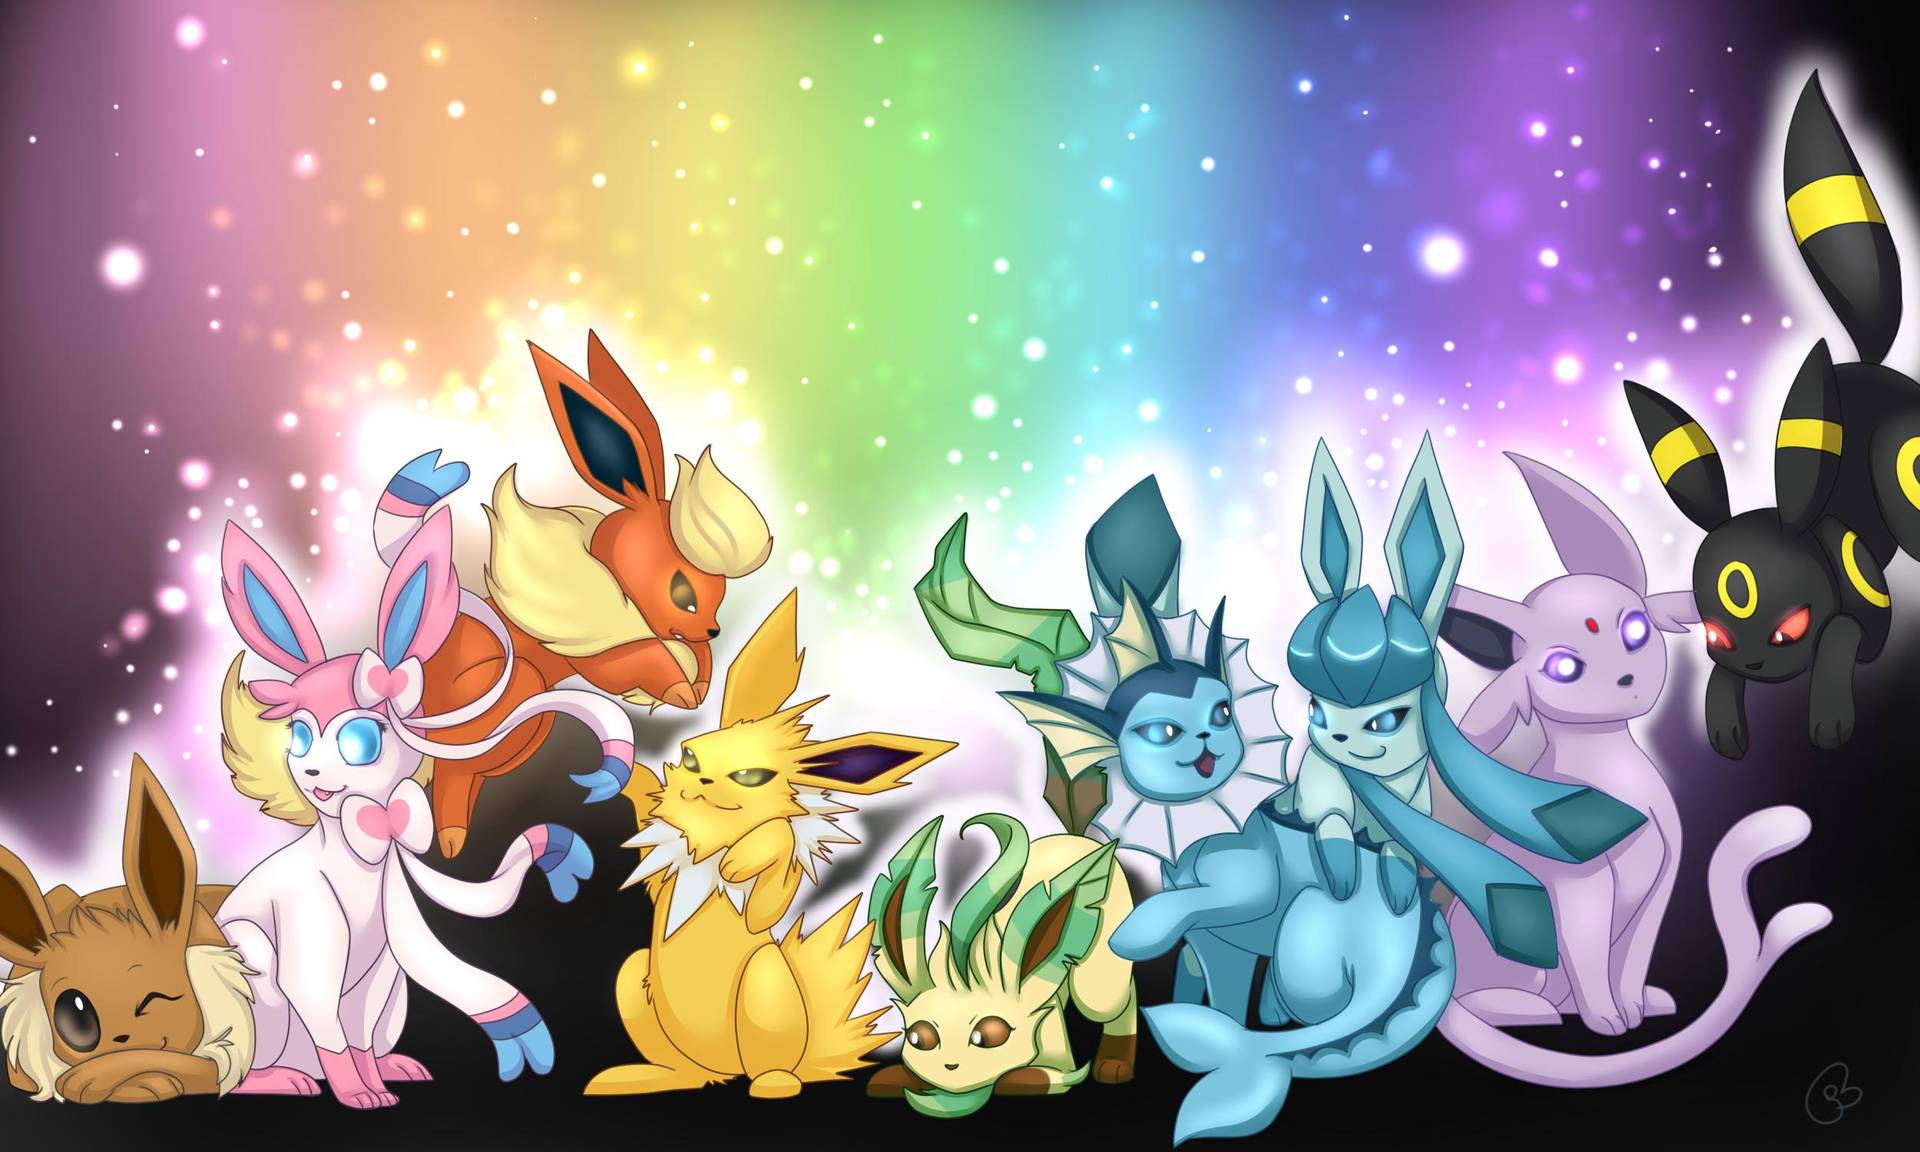 Glittery Eevee and its beautiful final form, Sylveon Wallpaper